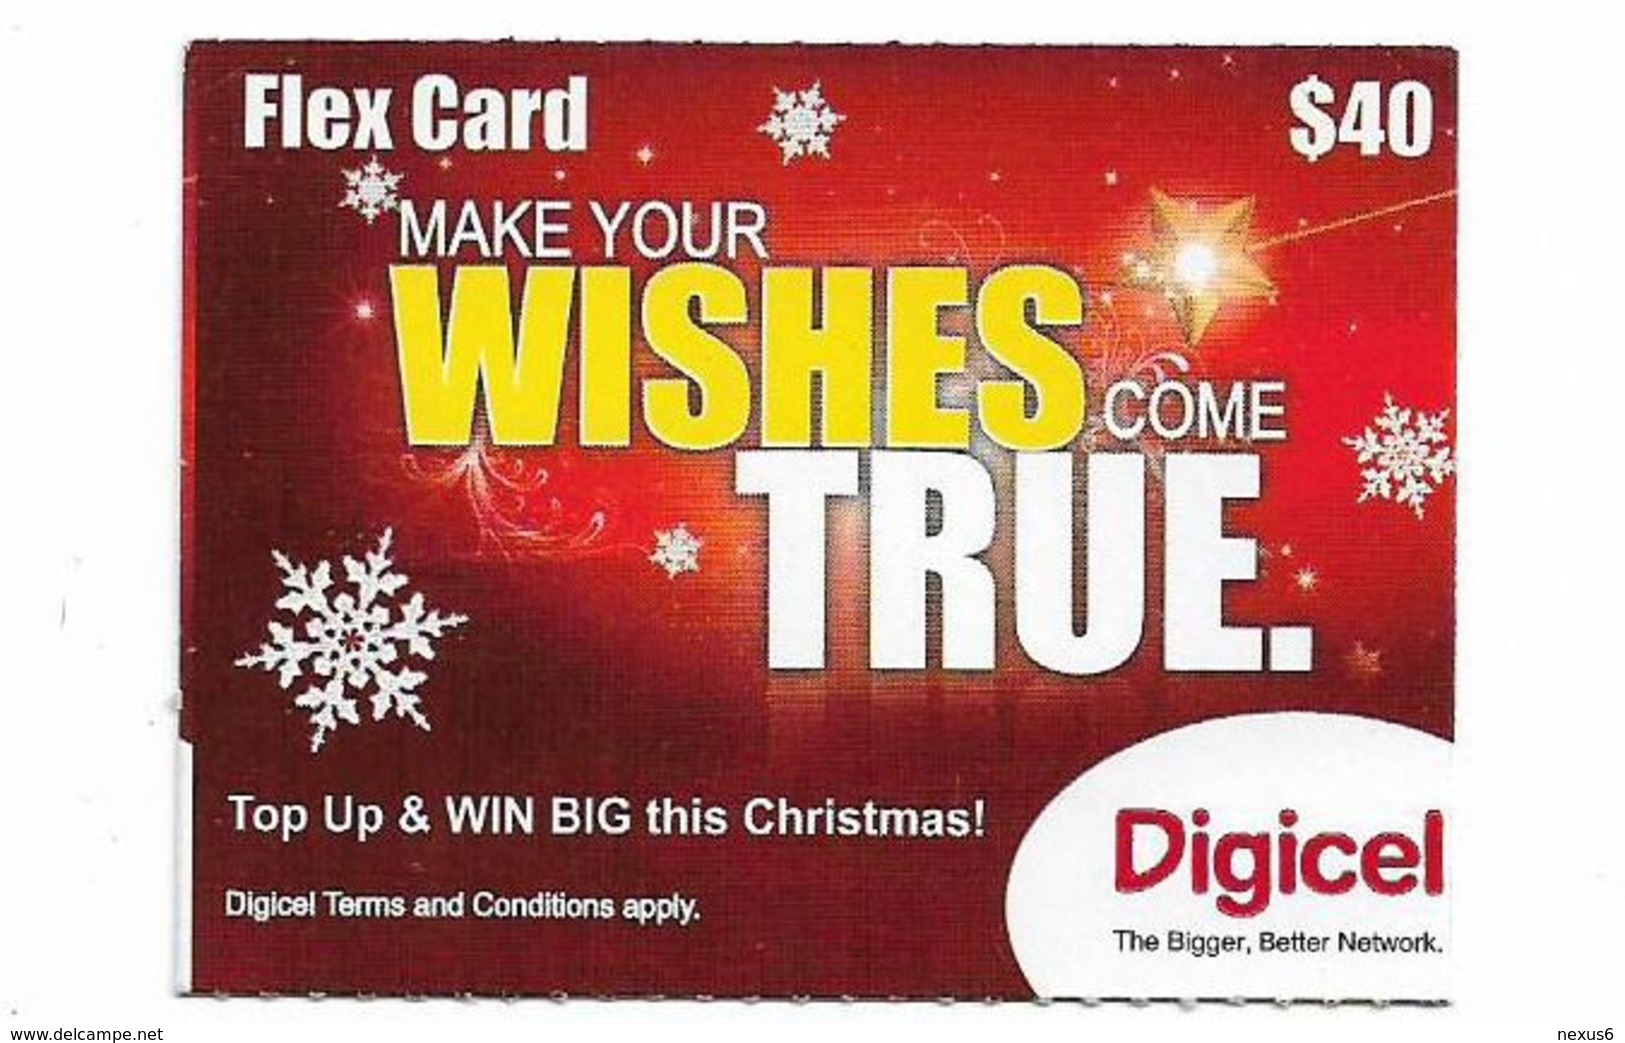 Grenada - Digicel - Flex Card, Make Your Christmas Wishes, Smaller Size GSM Refill 40EC$, Exp. 18.09.2012, Used - Grenade